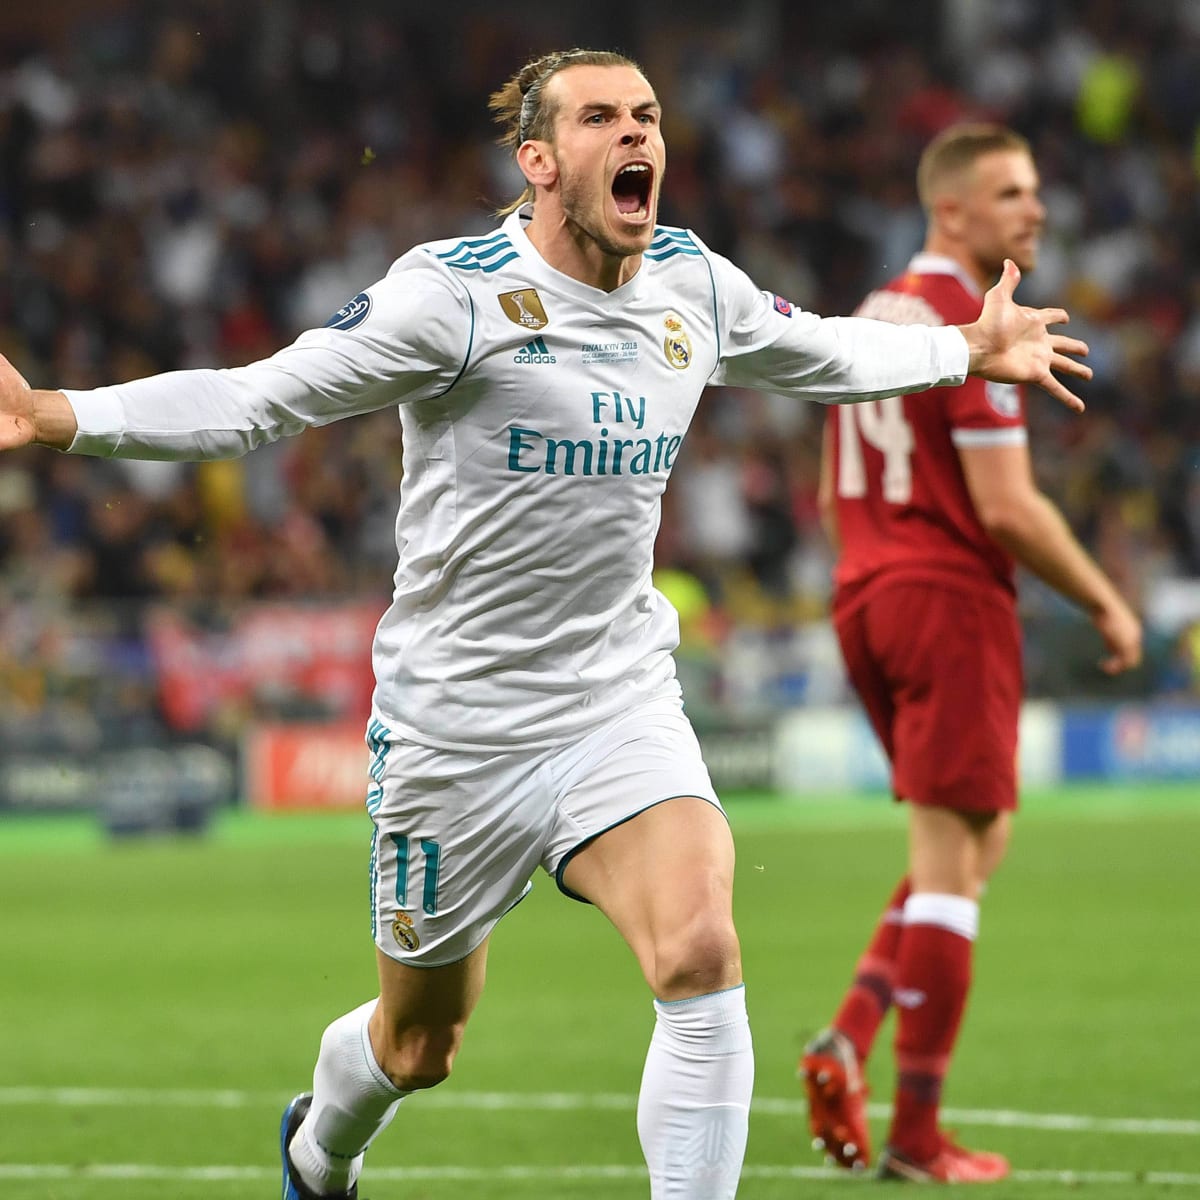 Real Madrid: What's up with the Gareth Bale retirement rumors?